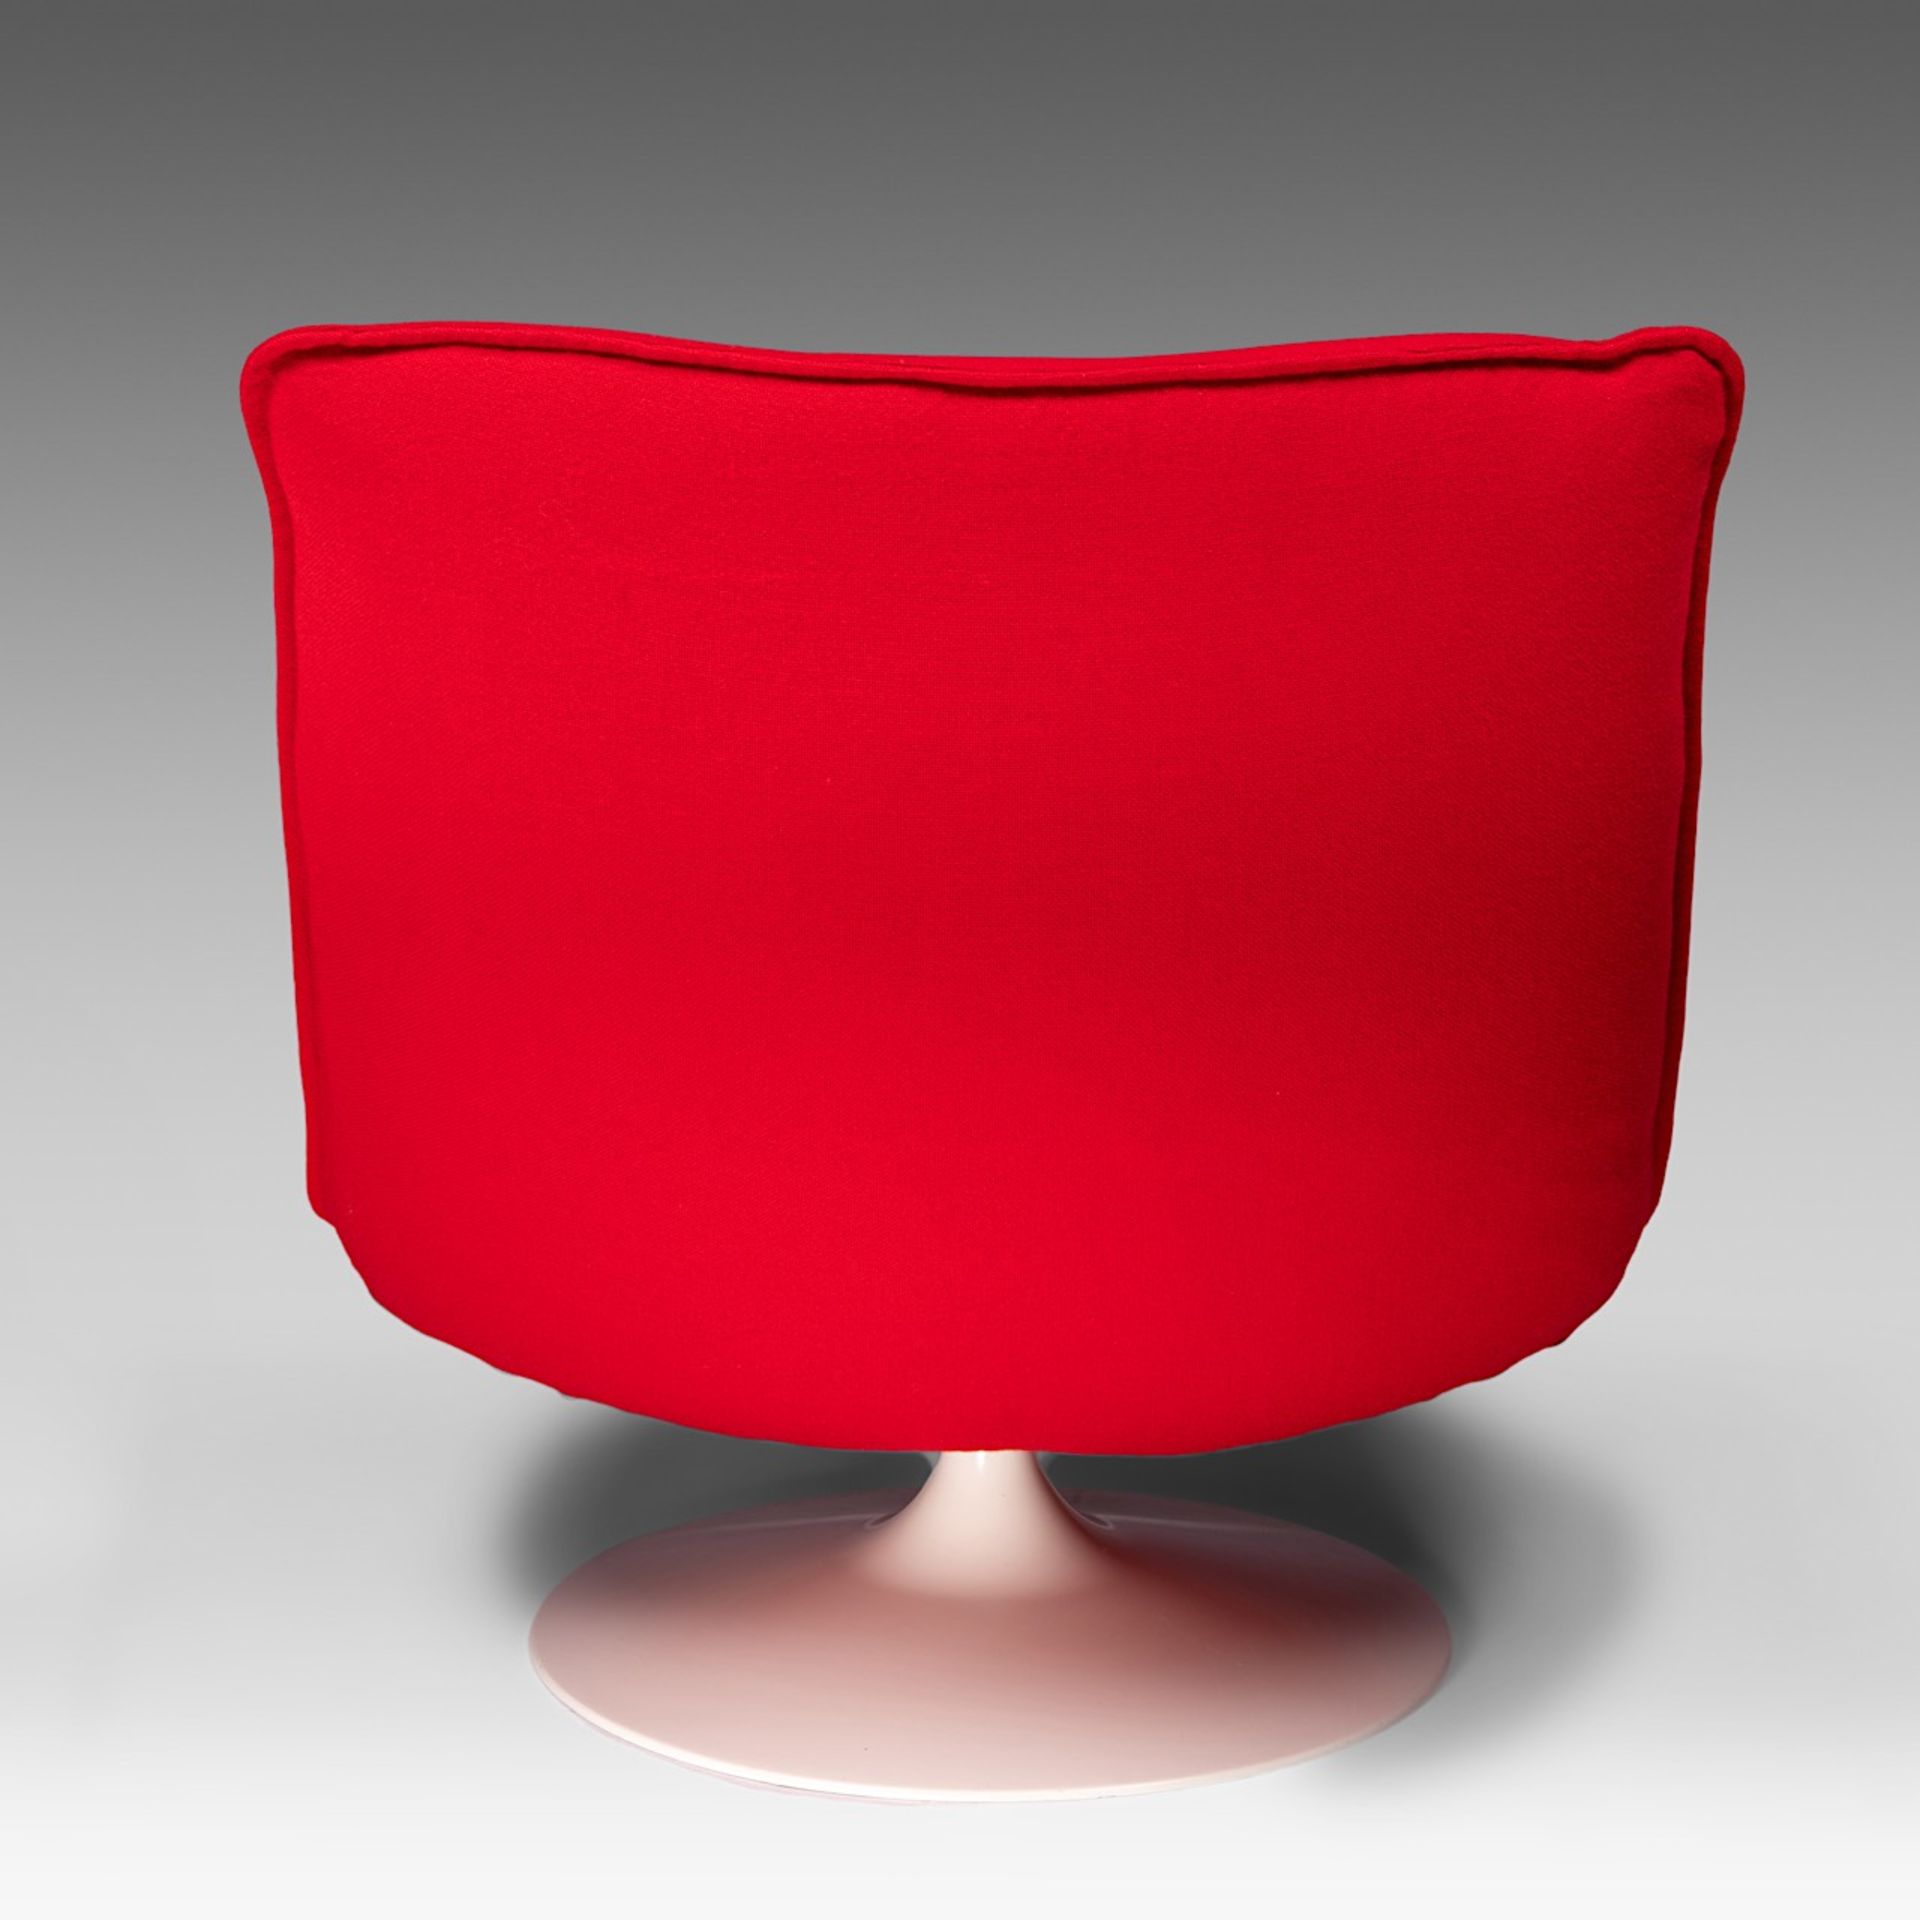 A Vintage F980 easy chair by Geoffrey Harcourt for Artifort (1970), H 82 - W 75 cm - Image 4 of 8